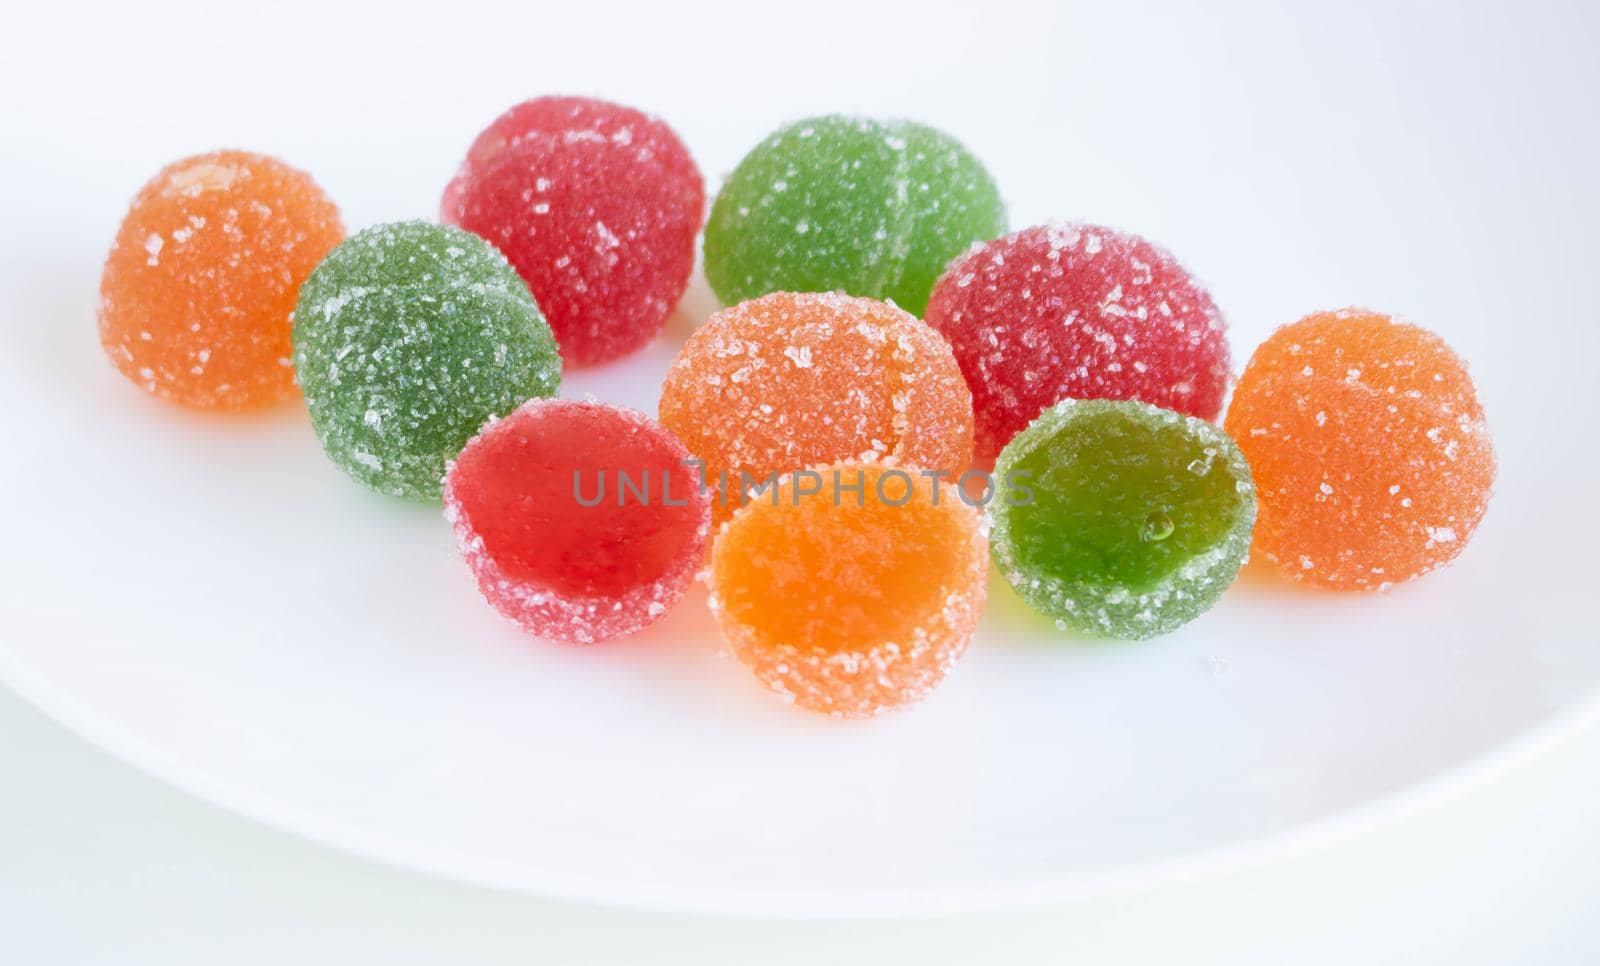 A pile of red, green and yellow jelly cubes on a white plate on a white background by lapushka62